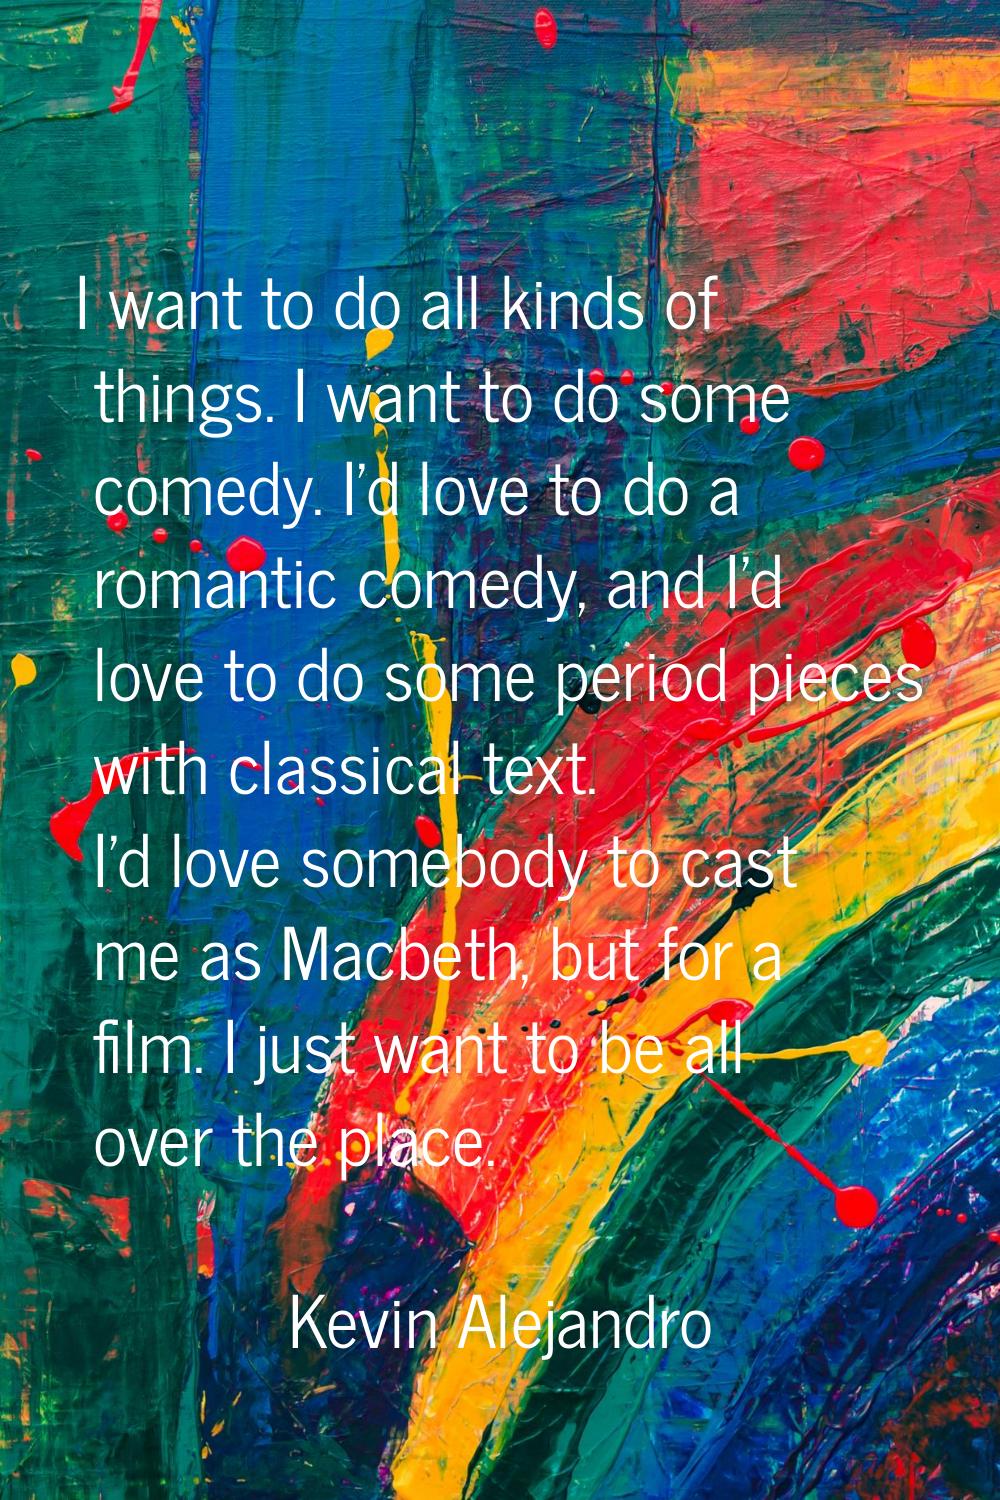 I want to do all kinds of things. I want to do some comedy. I'd love to do a romantic comedy, and I